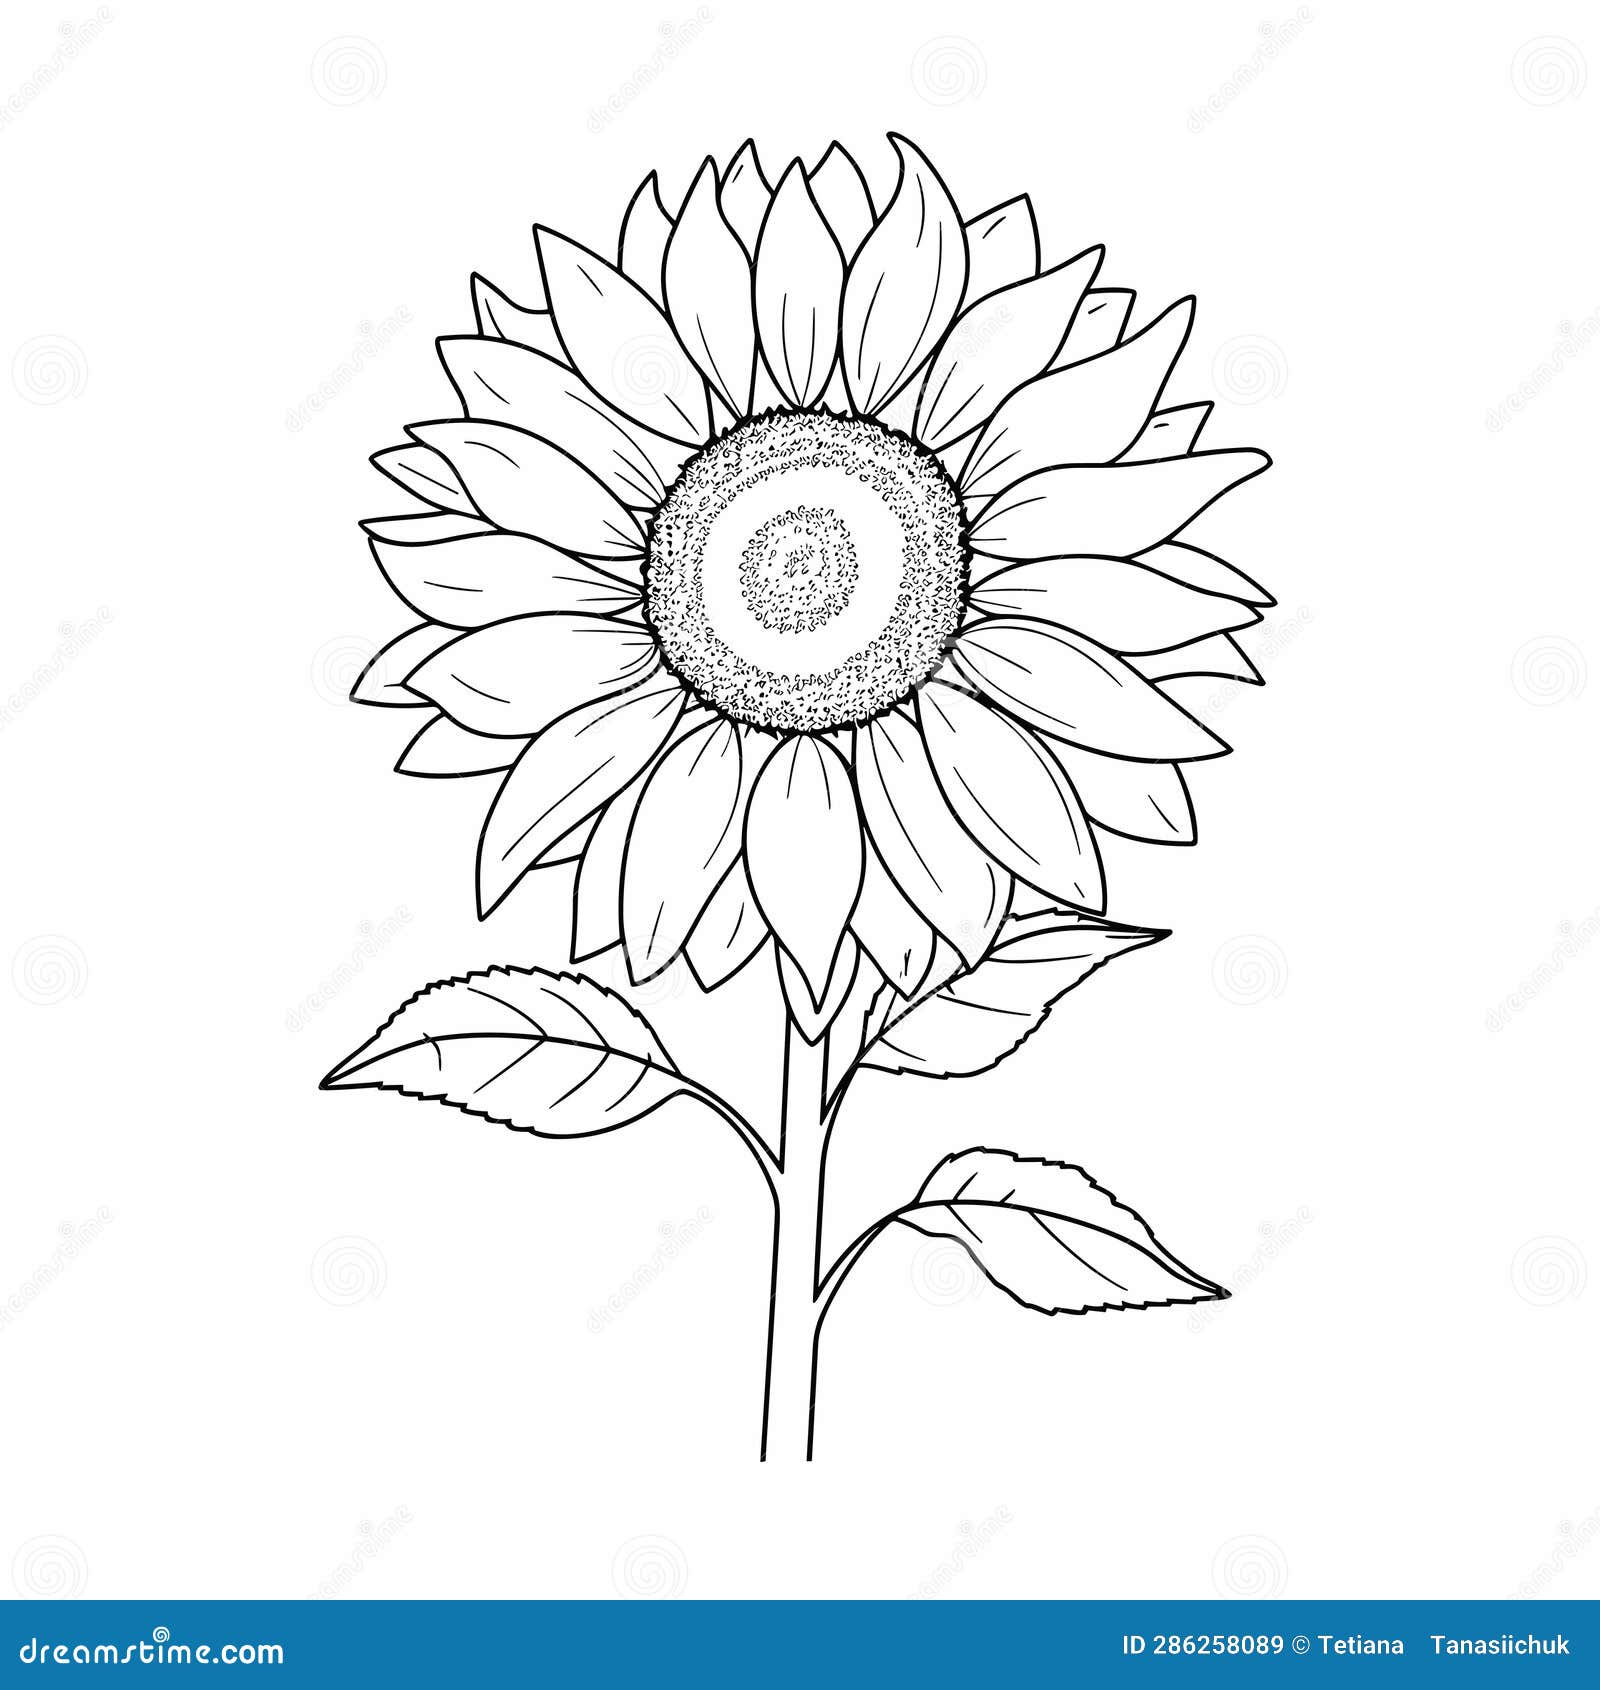 Sunflower Flower Coloring Book Page. Coloring Book Page for Adults or ...